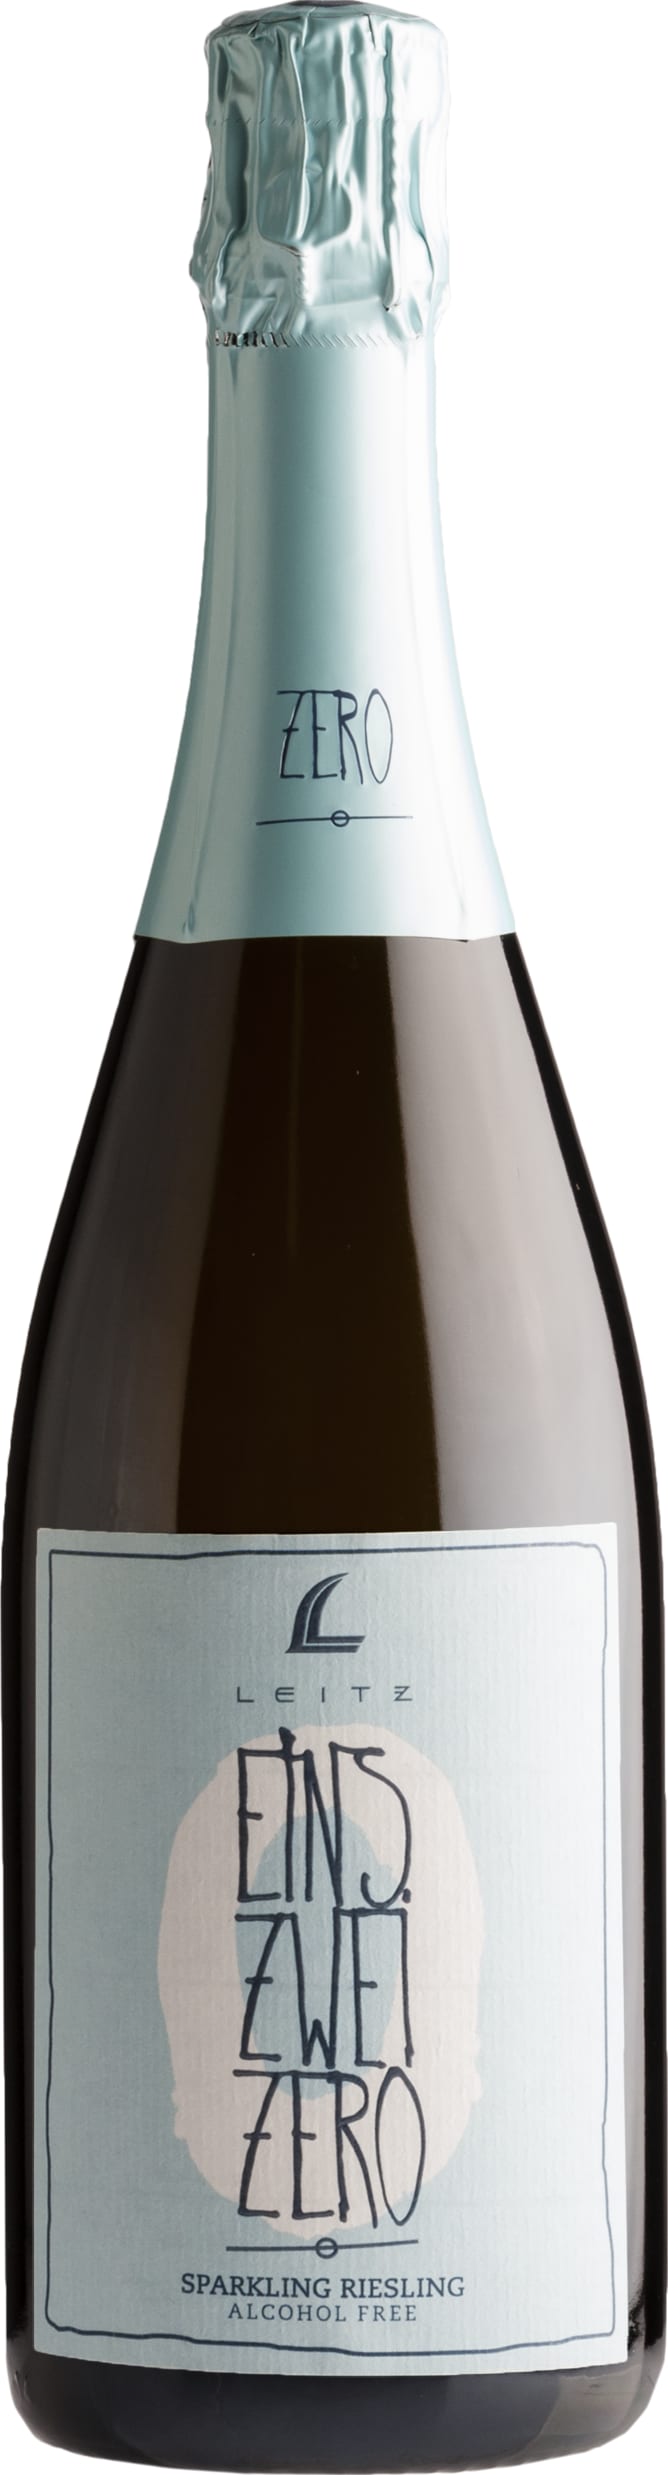 JJ Leitz Eins Zwei Zero Sparkling Riesling (Alcohol Free) 75cl NV - Buy JJ Leitz Wines from GREAT WINES DIRECT wine shop